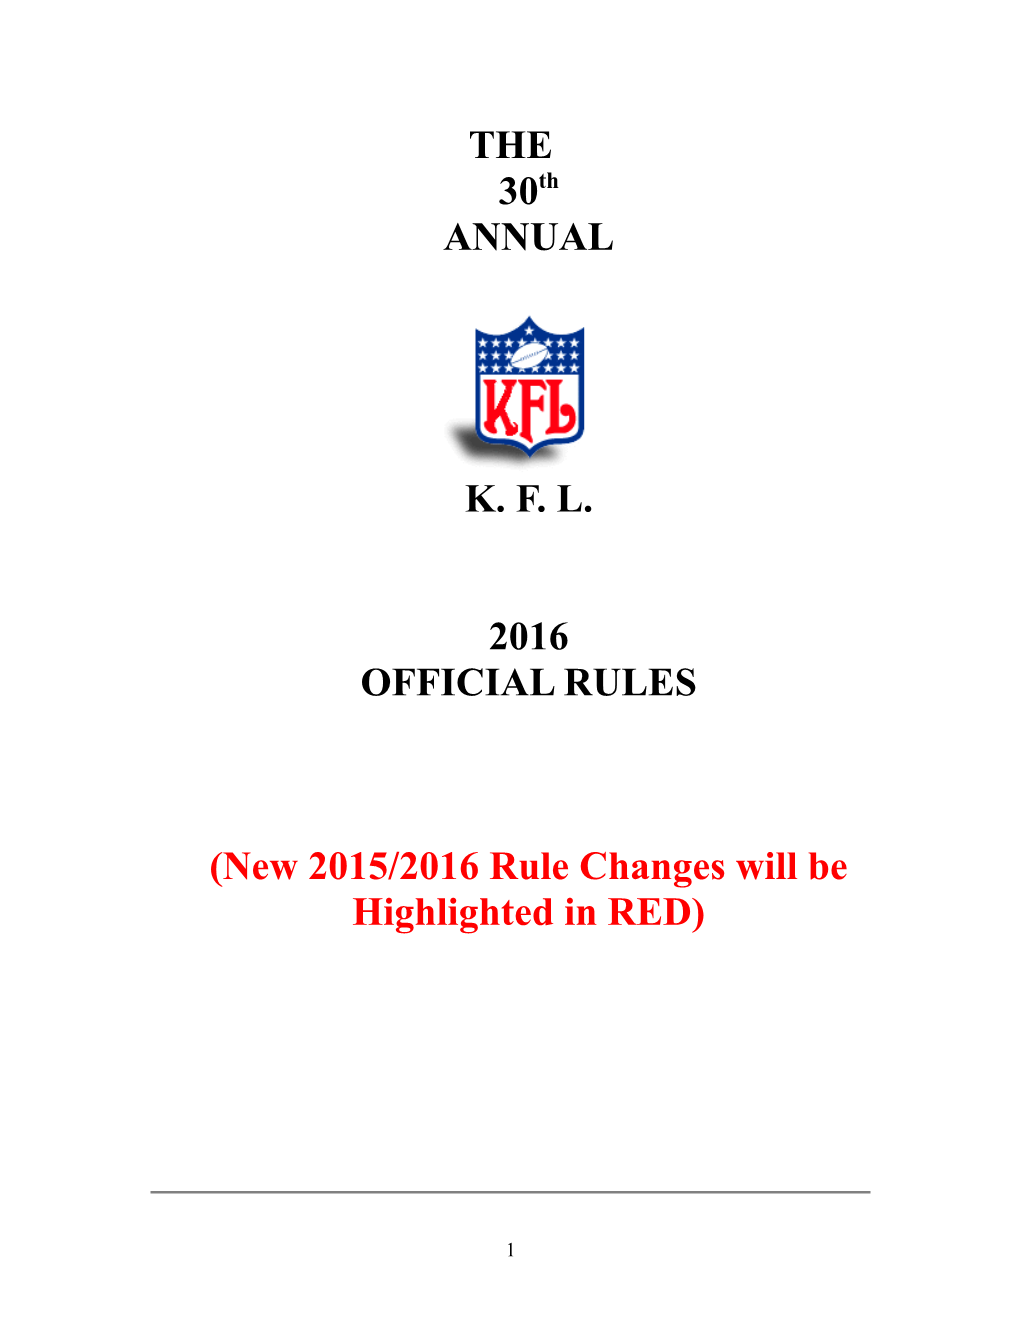 The30thannualk. F. L.2016OFFICIAL RULES(New 2015/2016 Rule Changes Will Be Highlighted in RED)